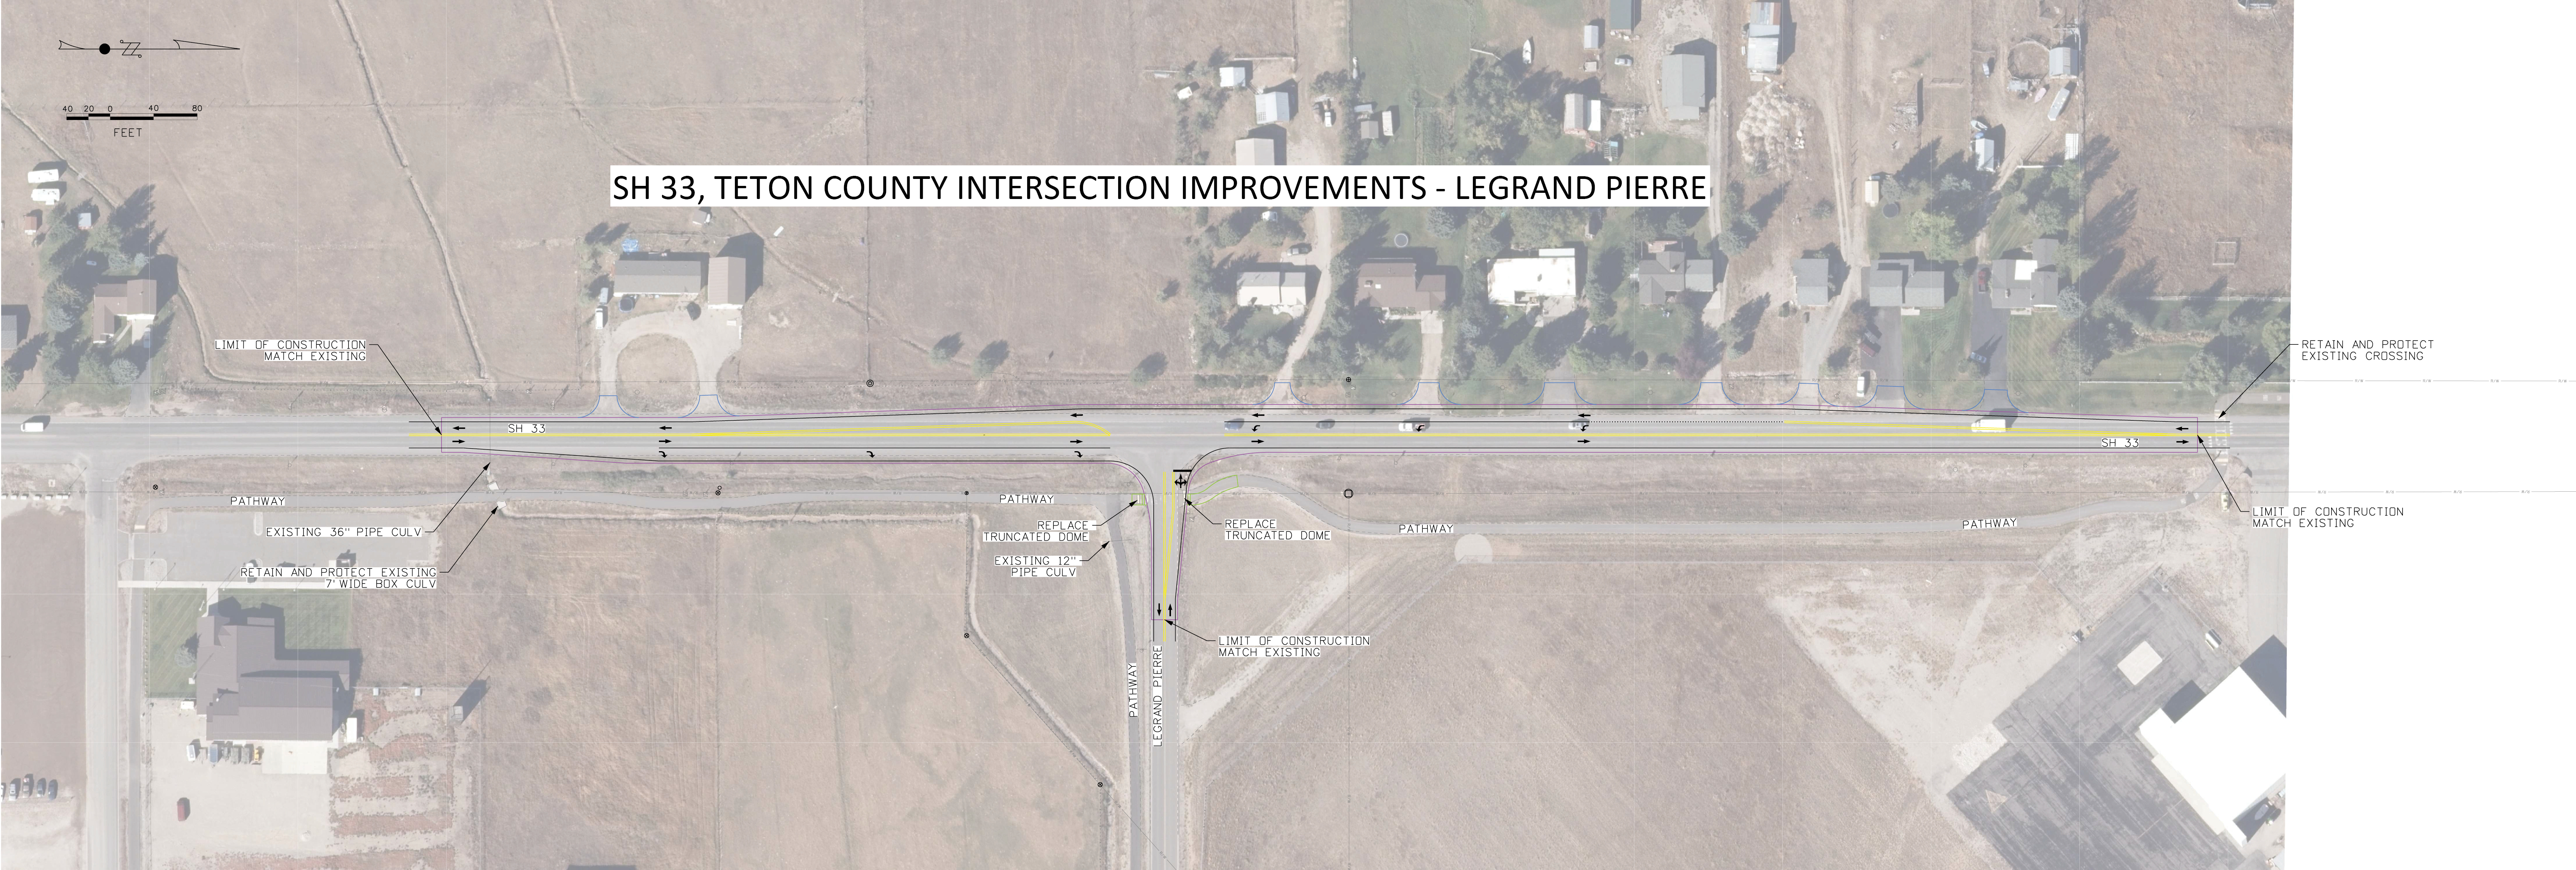 Typical Turn Lane improvements along ID-33 and 8000 South.